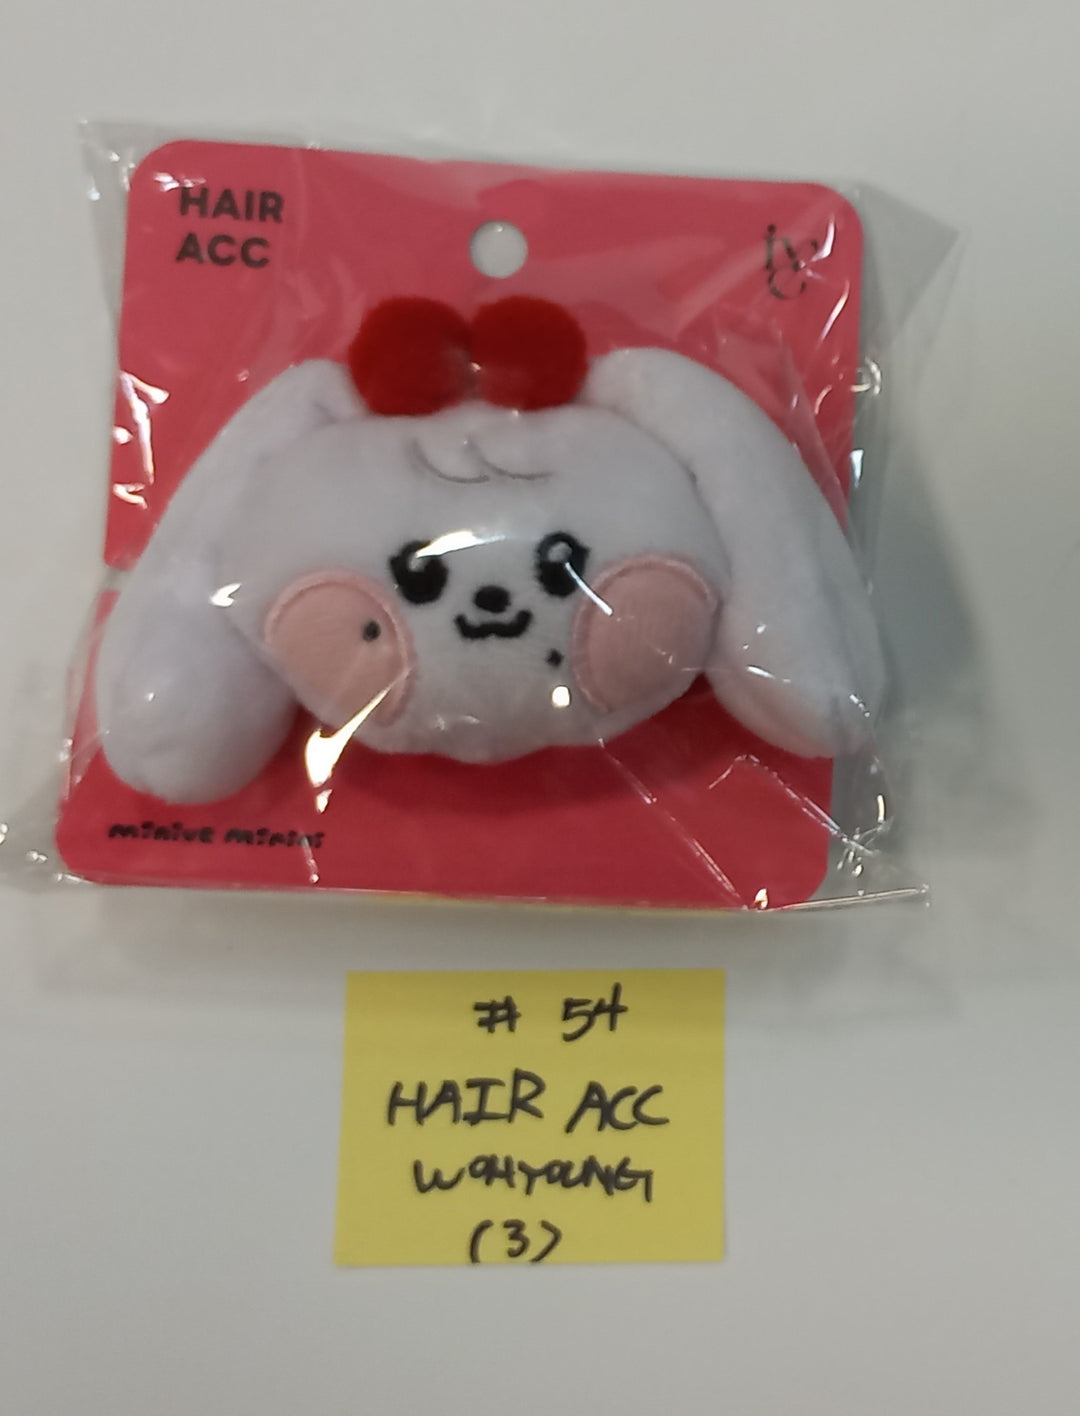 IVE "SWITCH" - Line Friends Gangnam Flagship Store Official MD [Plush keyring, Pouch, Flat Plush, Smarttok] [24.5.4]